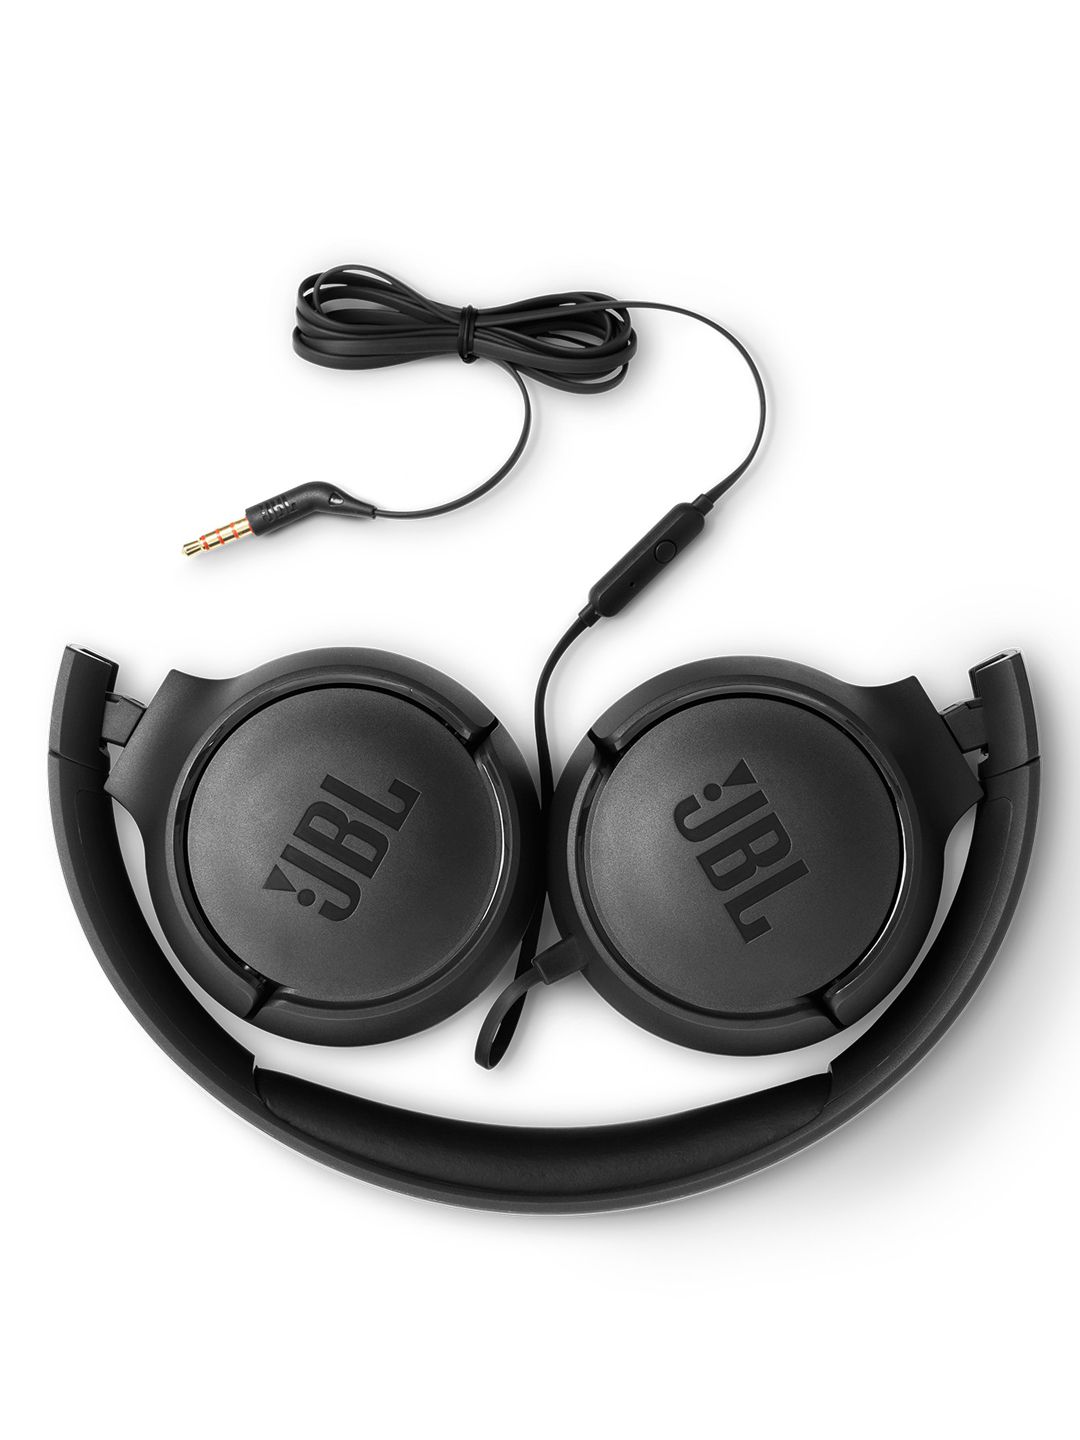 JBL Black T500 Powerful Bass On-Ear Headphones with Mic Price in India